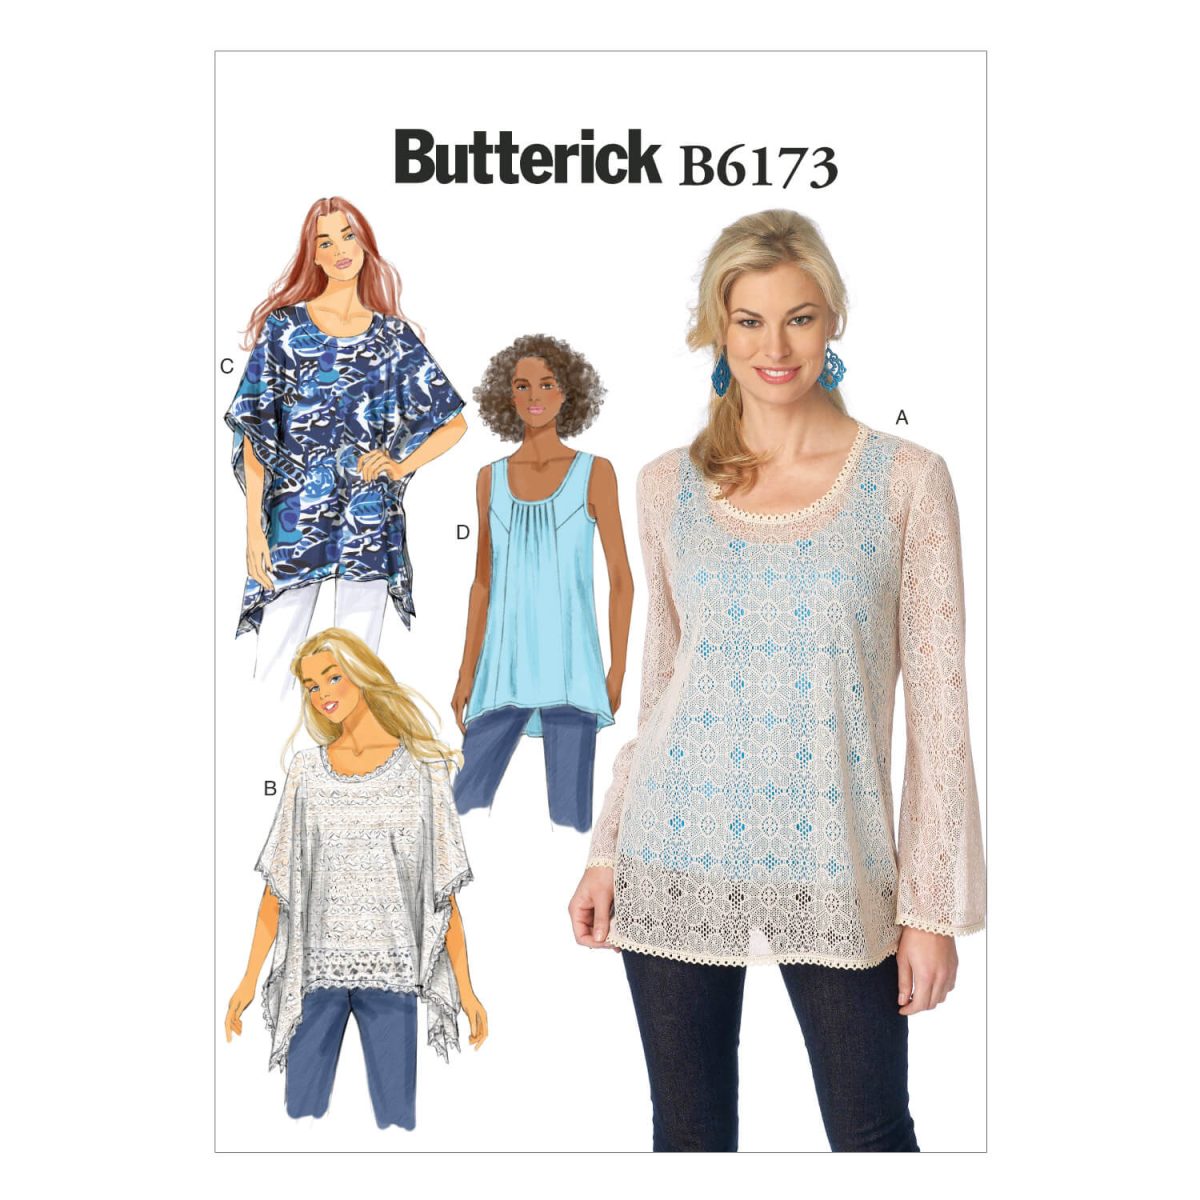 Butterick Sewing Pattern B6173 Misses' Tunic and Top